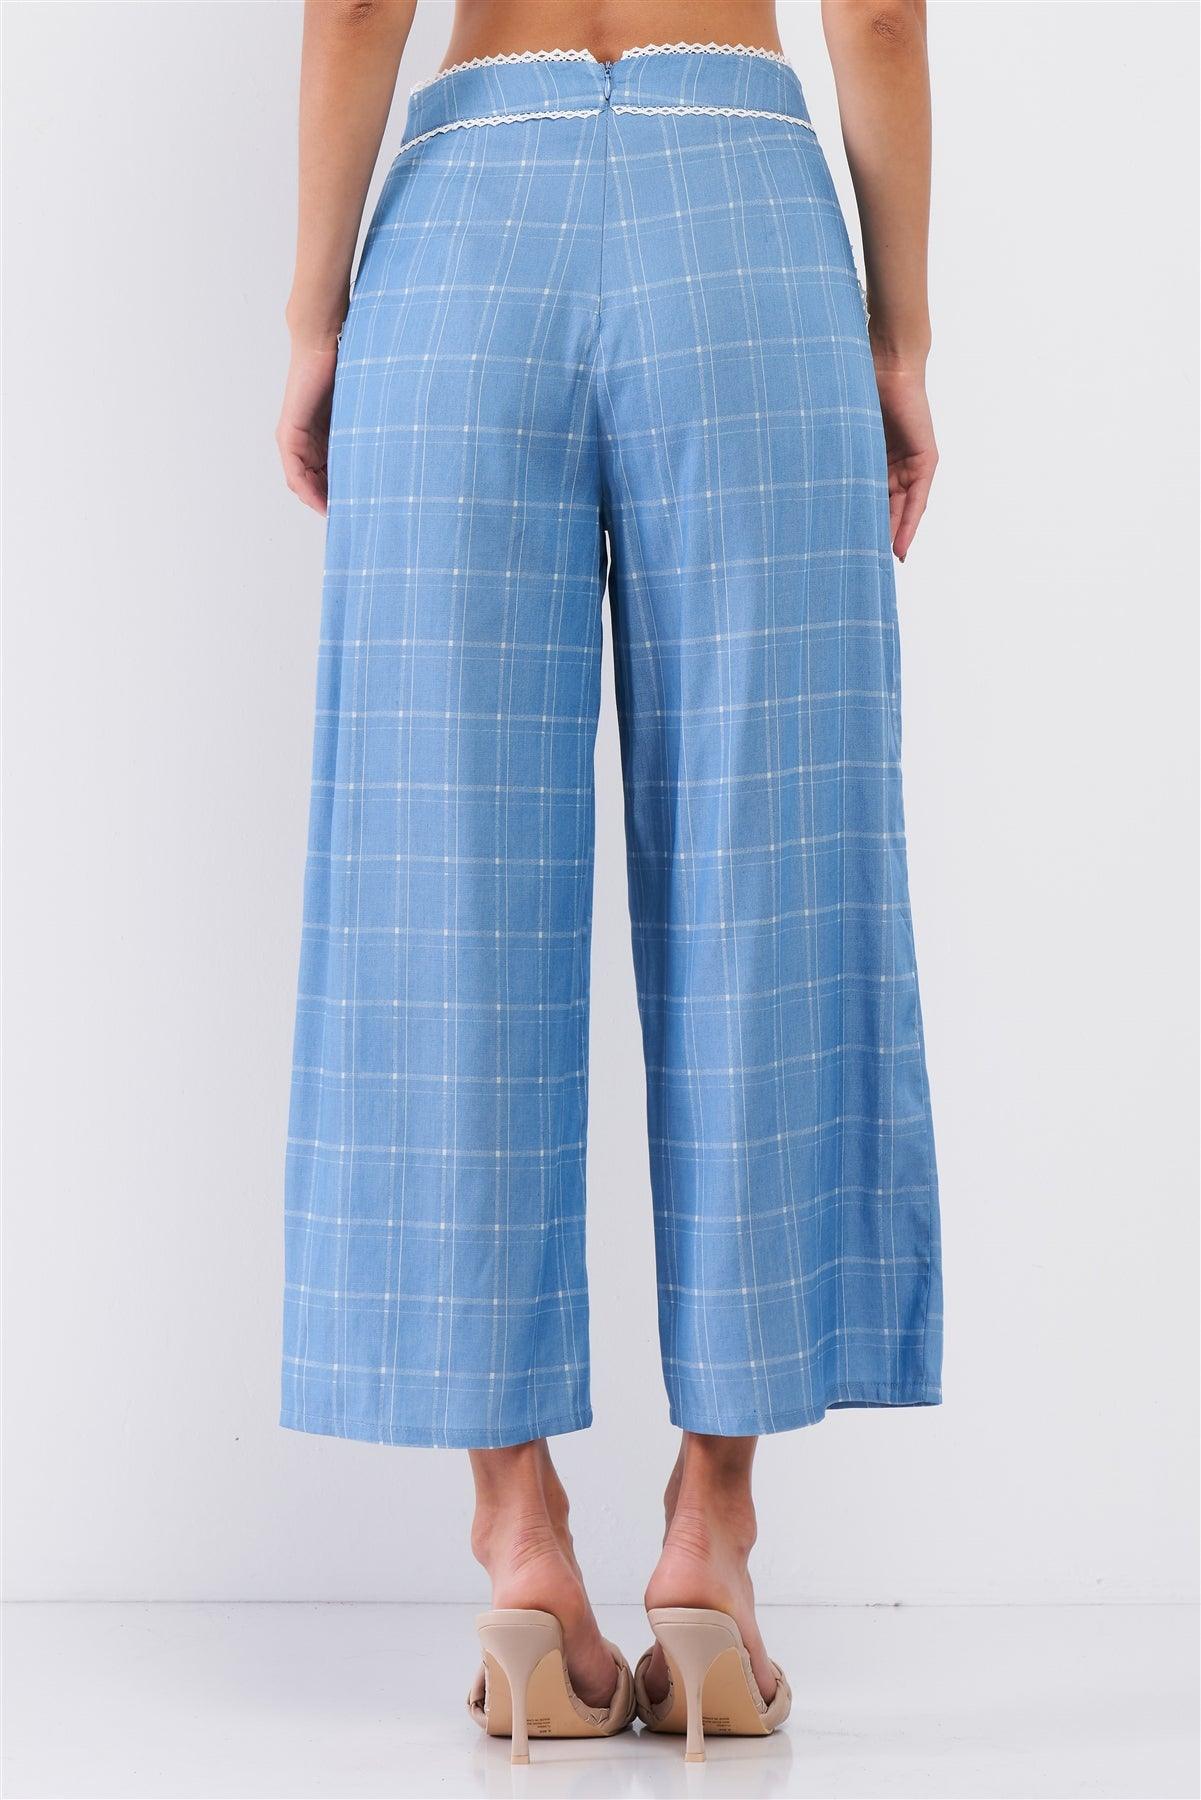 Baby Blue High Waisted Checkered White Lace Trim Wide Leg Pants /3-2-1